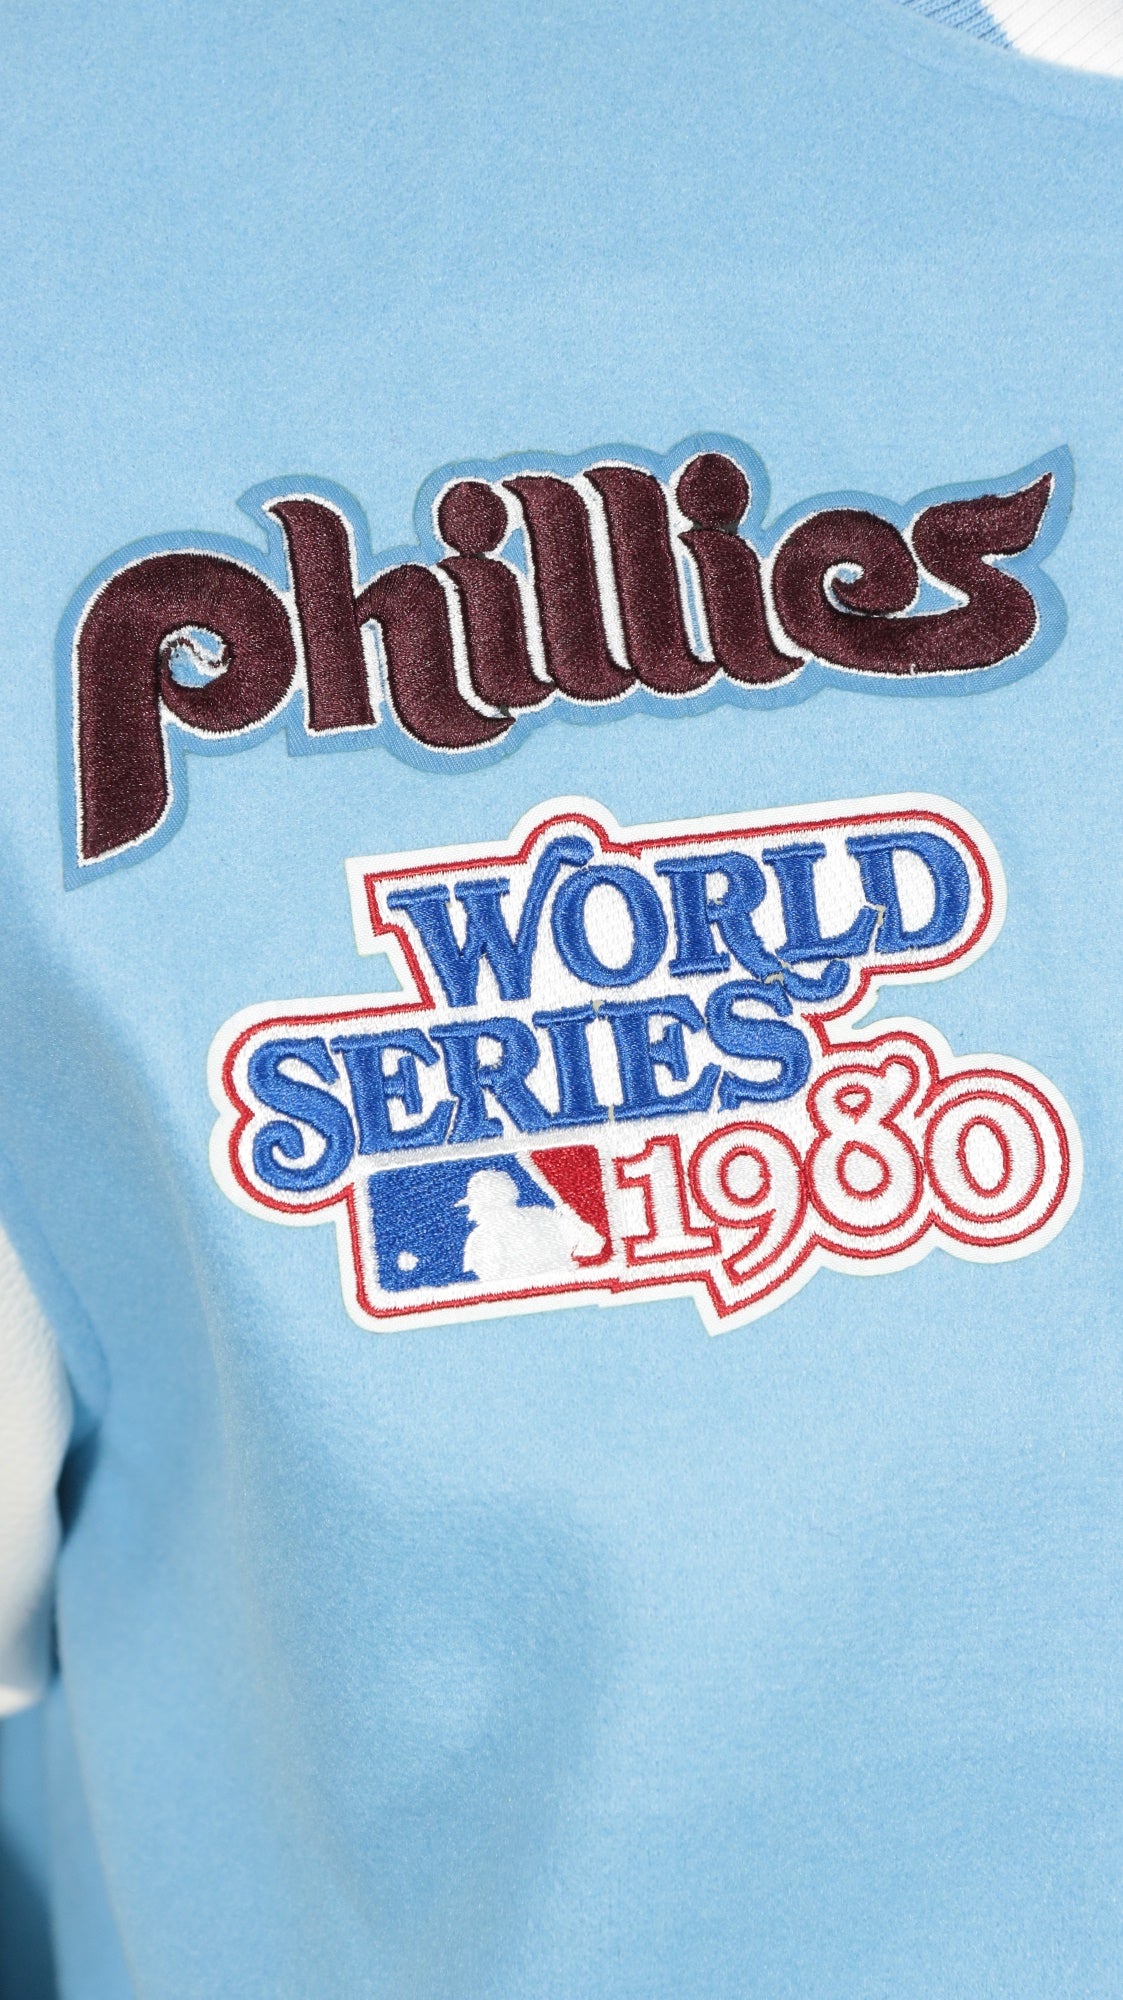 phillies 1980 word series patch on the Philadelphia Phillies Cooperstown Phillies City Hall Logo 1980 World Series Patch Retro Classic Rib | University Blue/White Wool Varsity Jacket